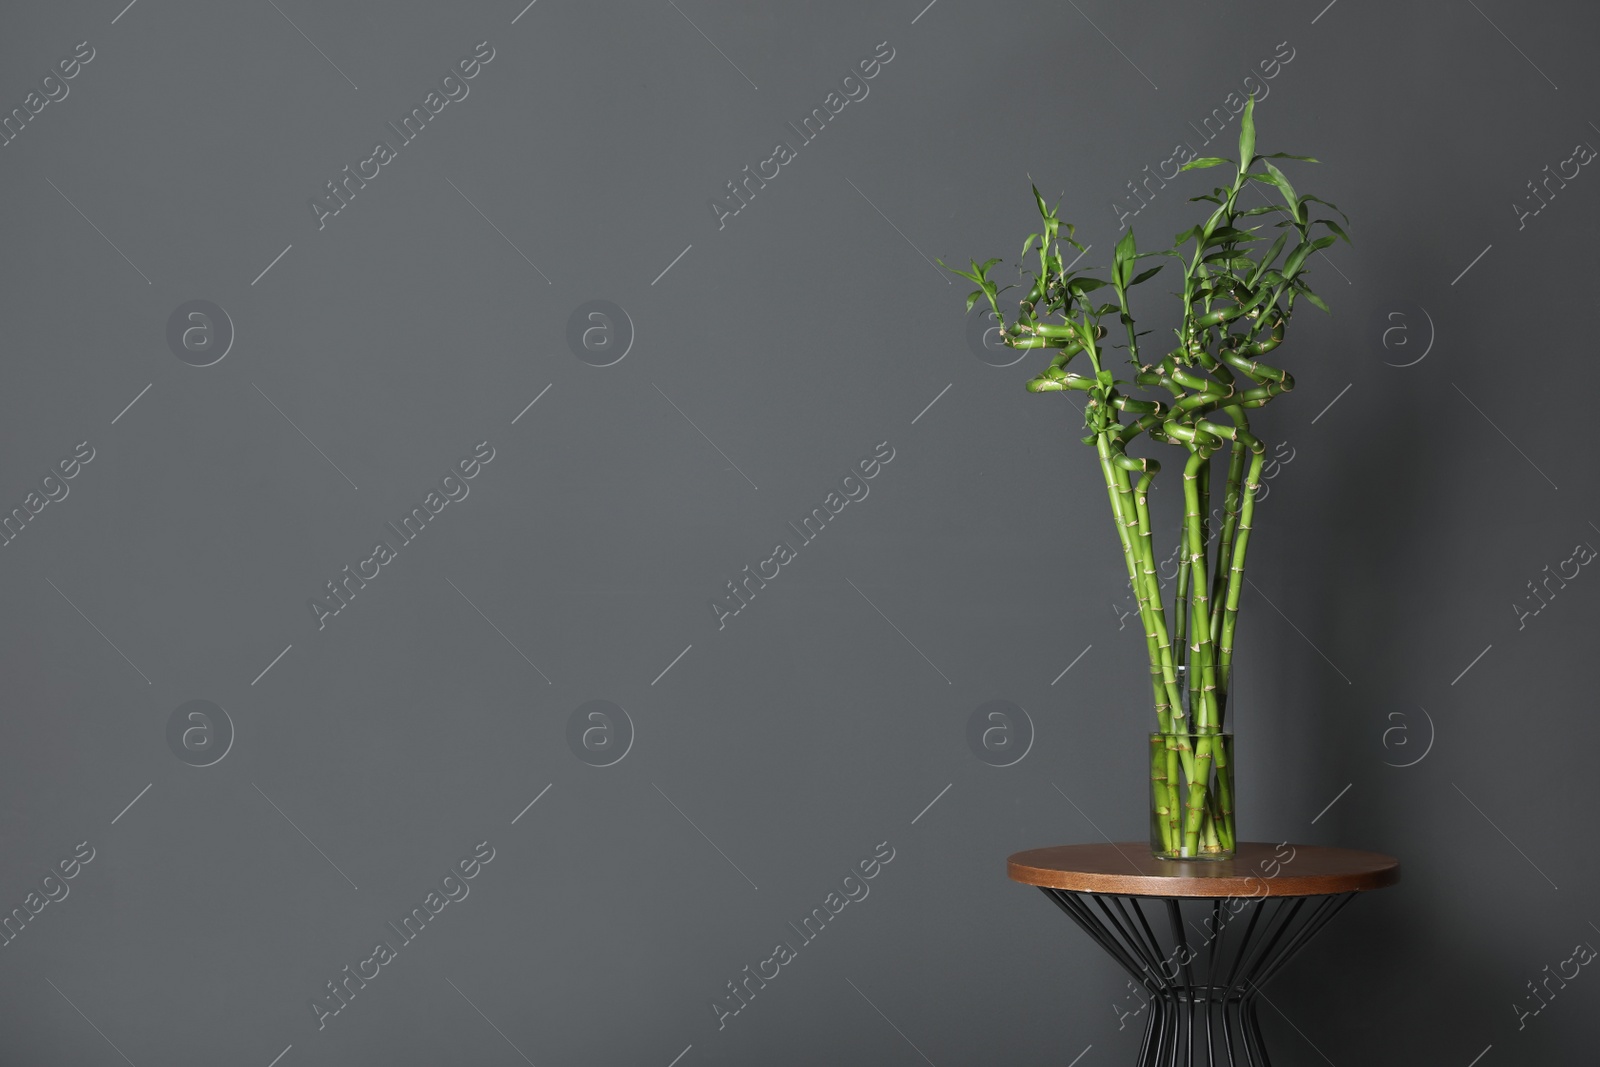 Photo of Vase with bamboo stems on table against grey wall, space for text